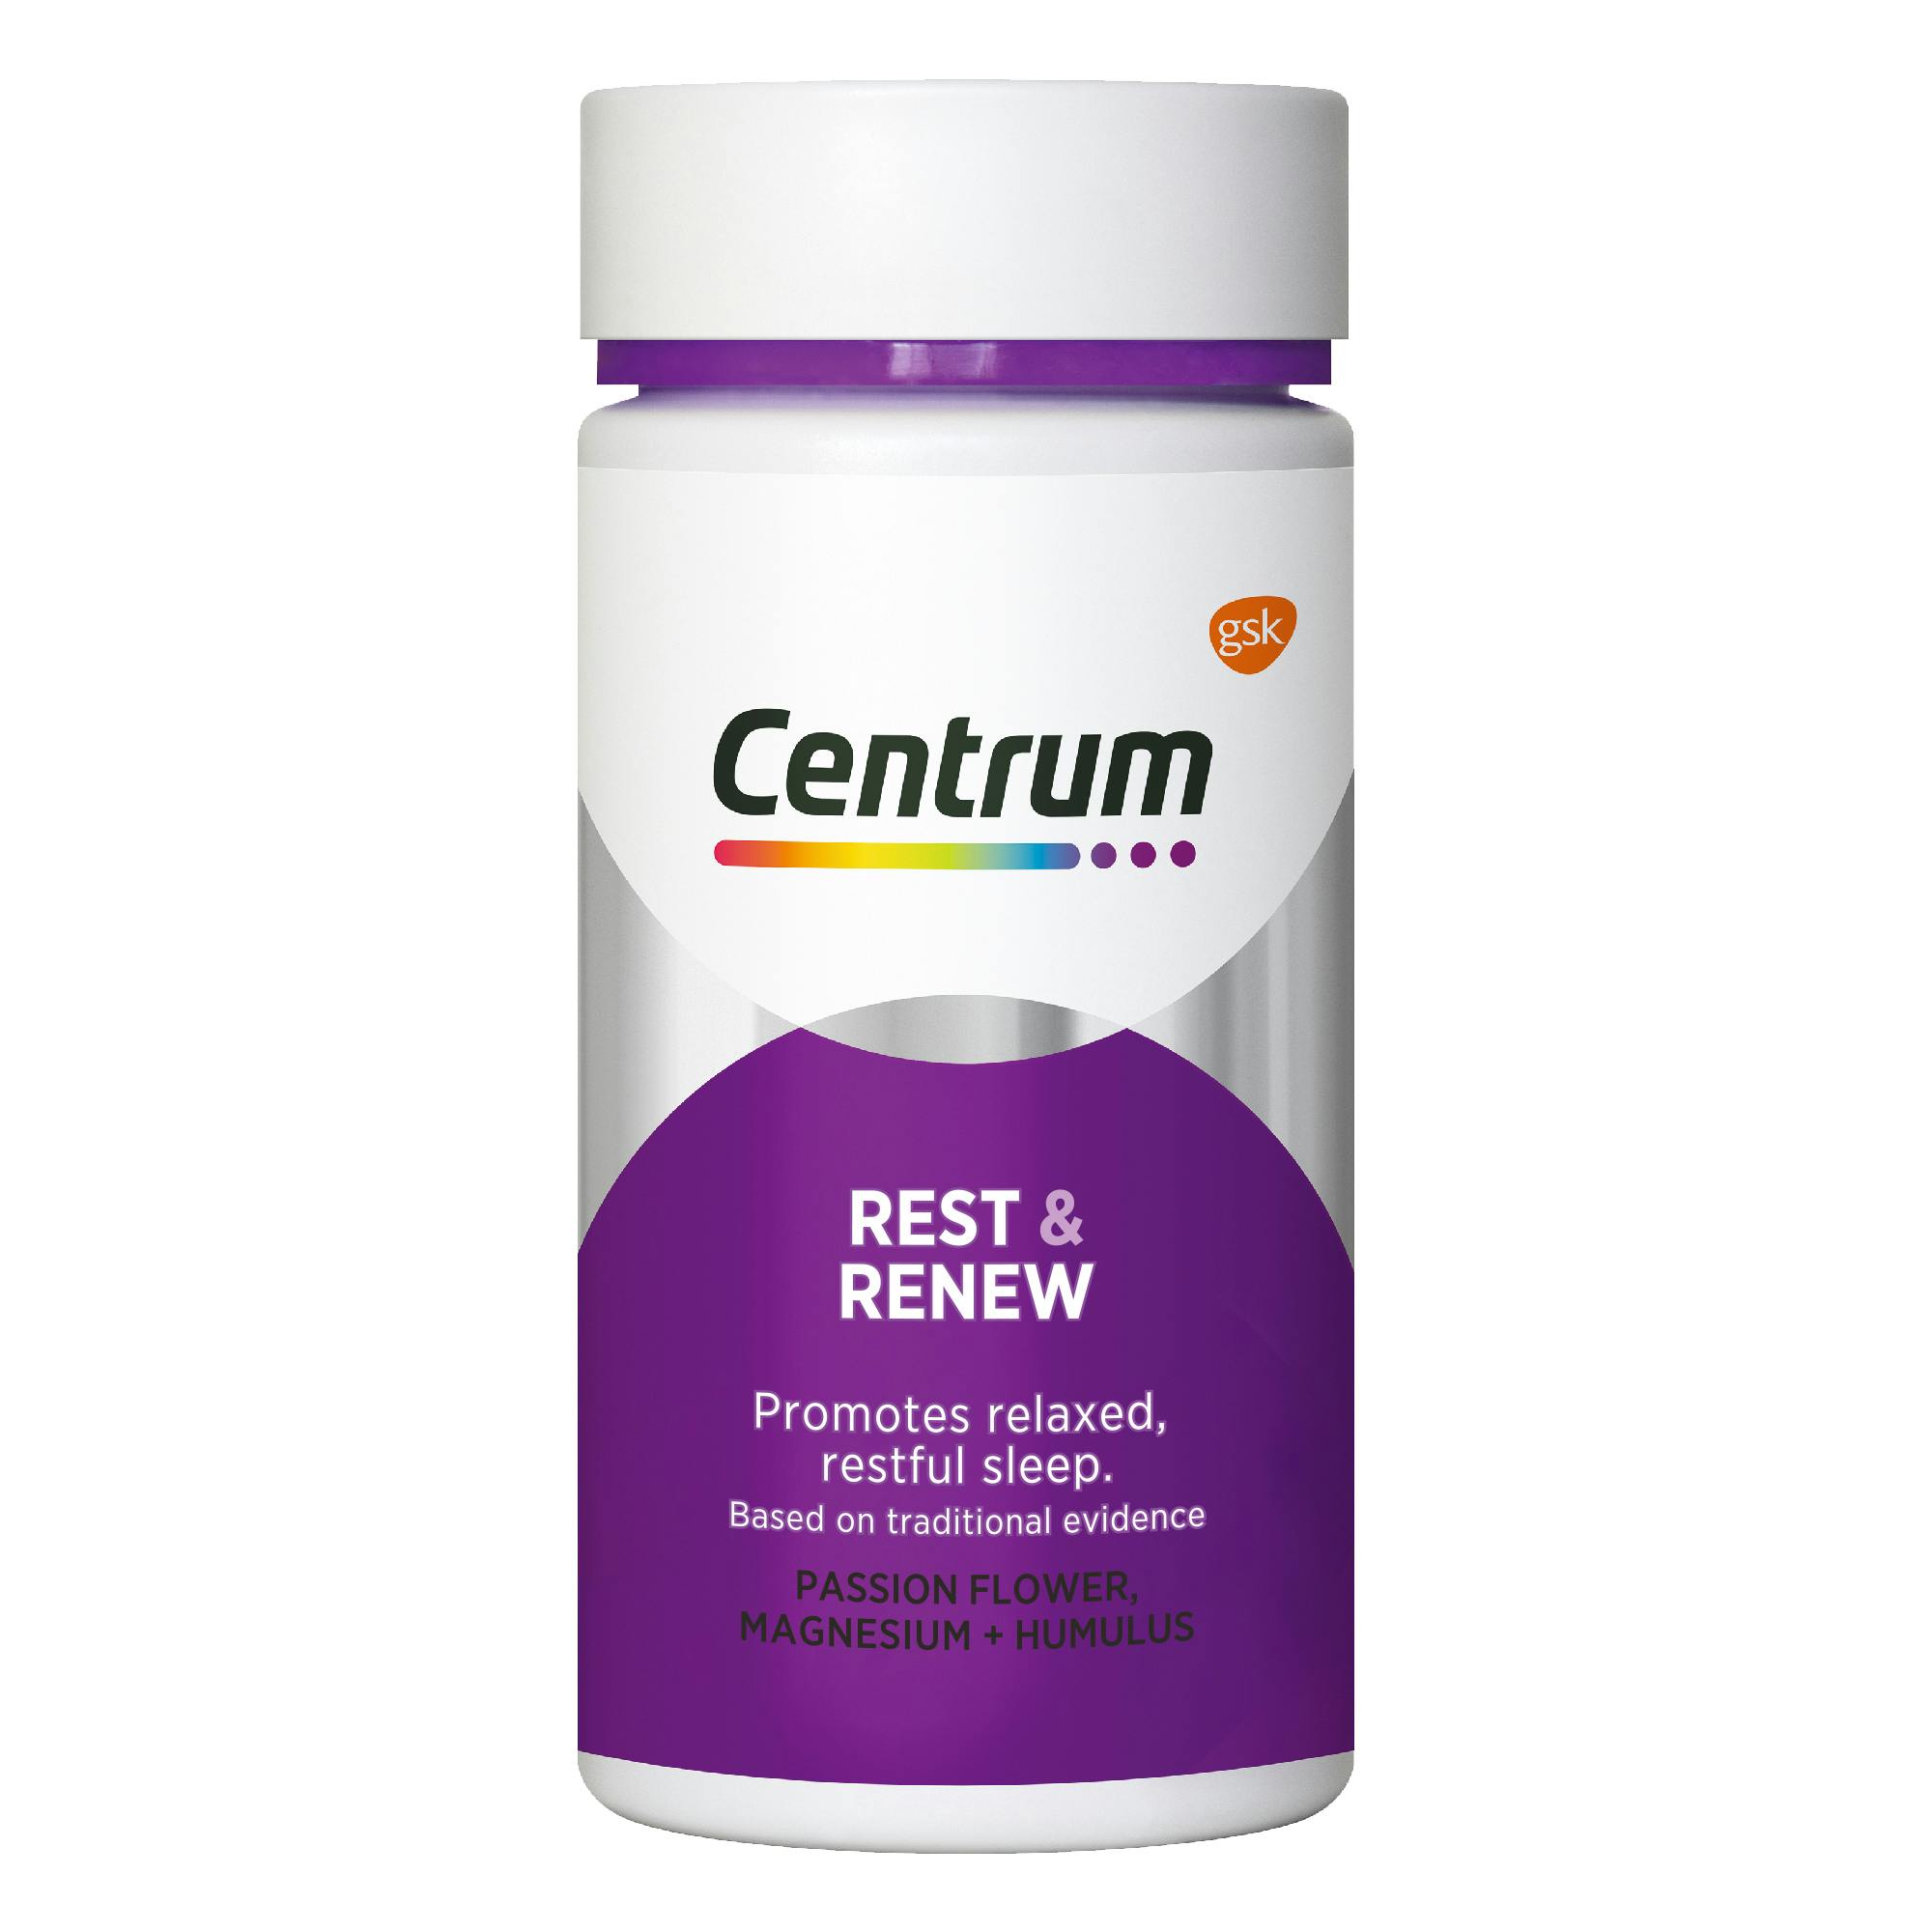 Bottle of Rest & Renew from the Centrum Benefits Blend (50 capsules).